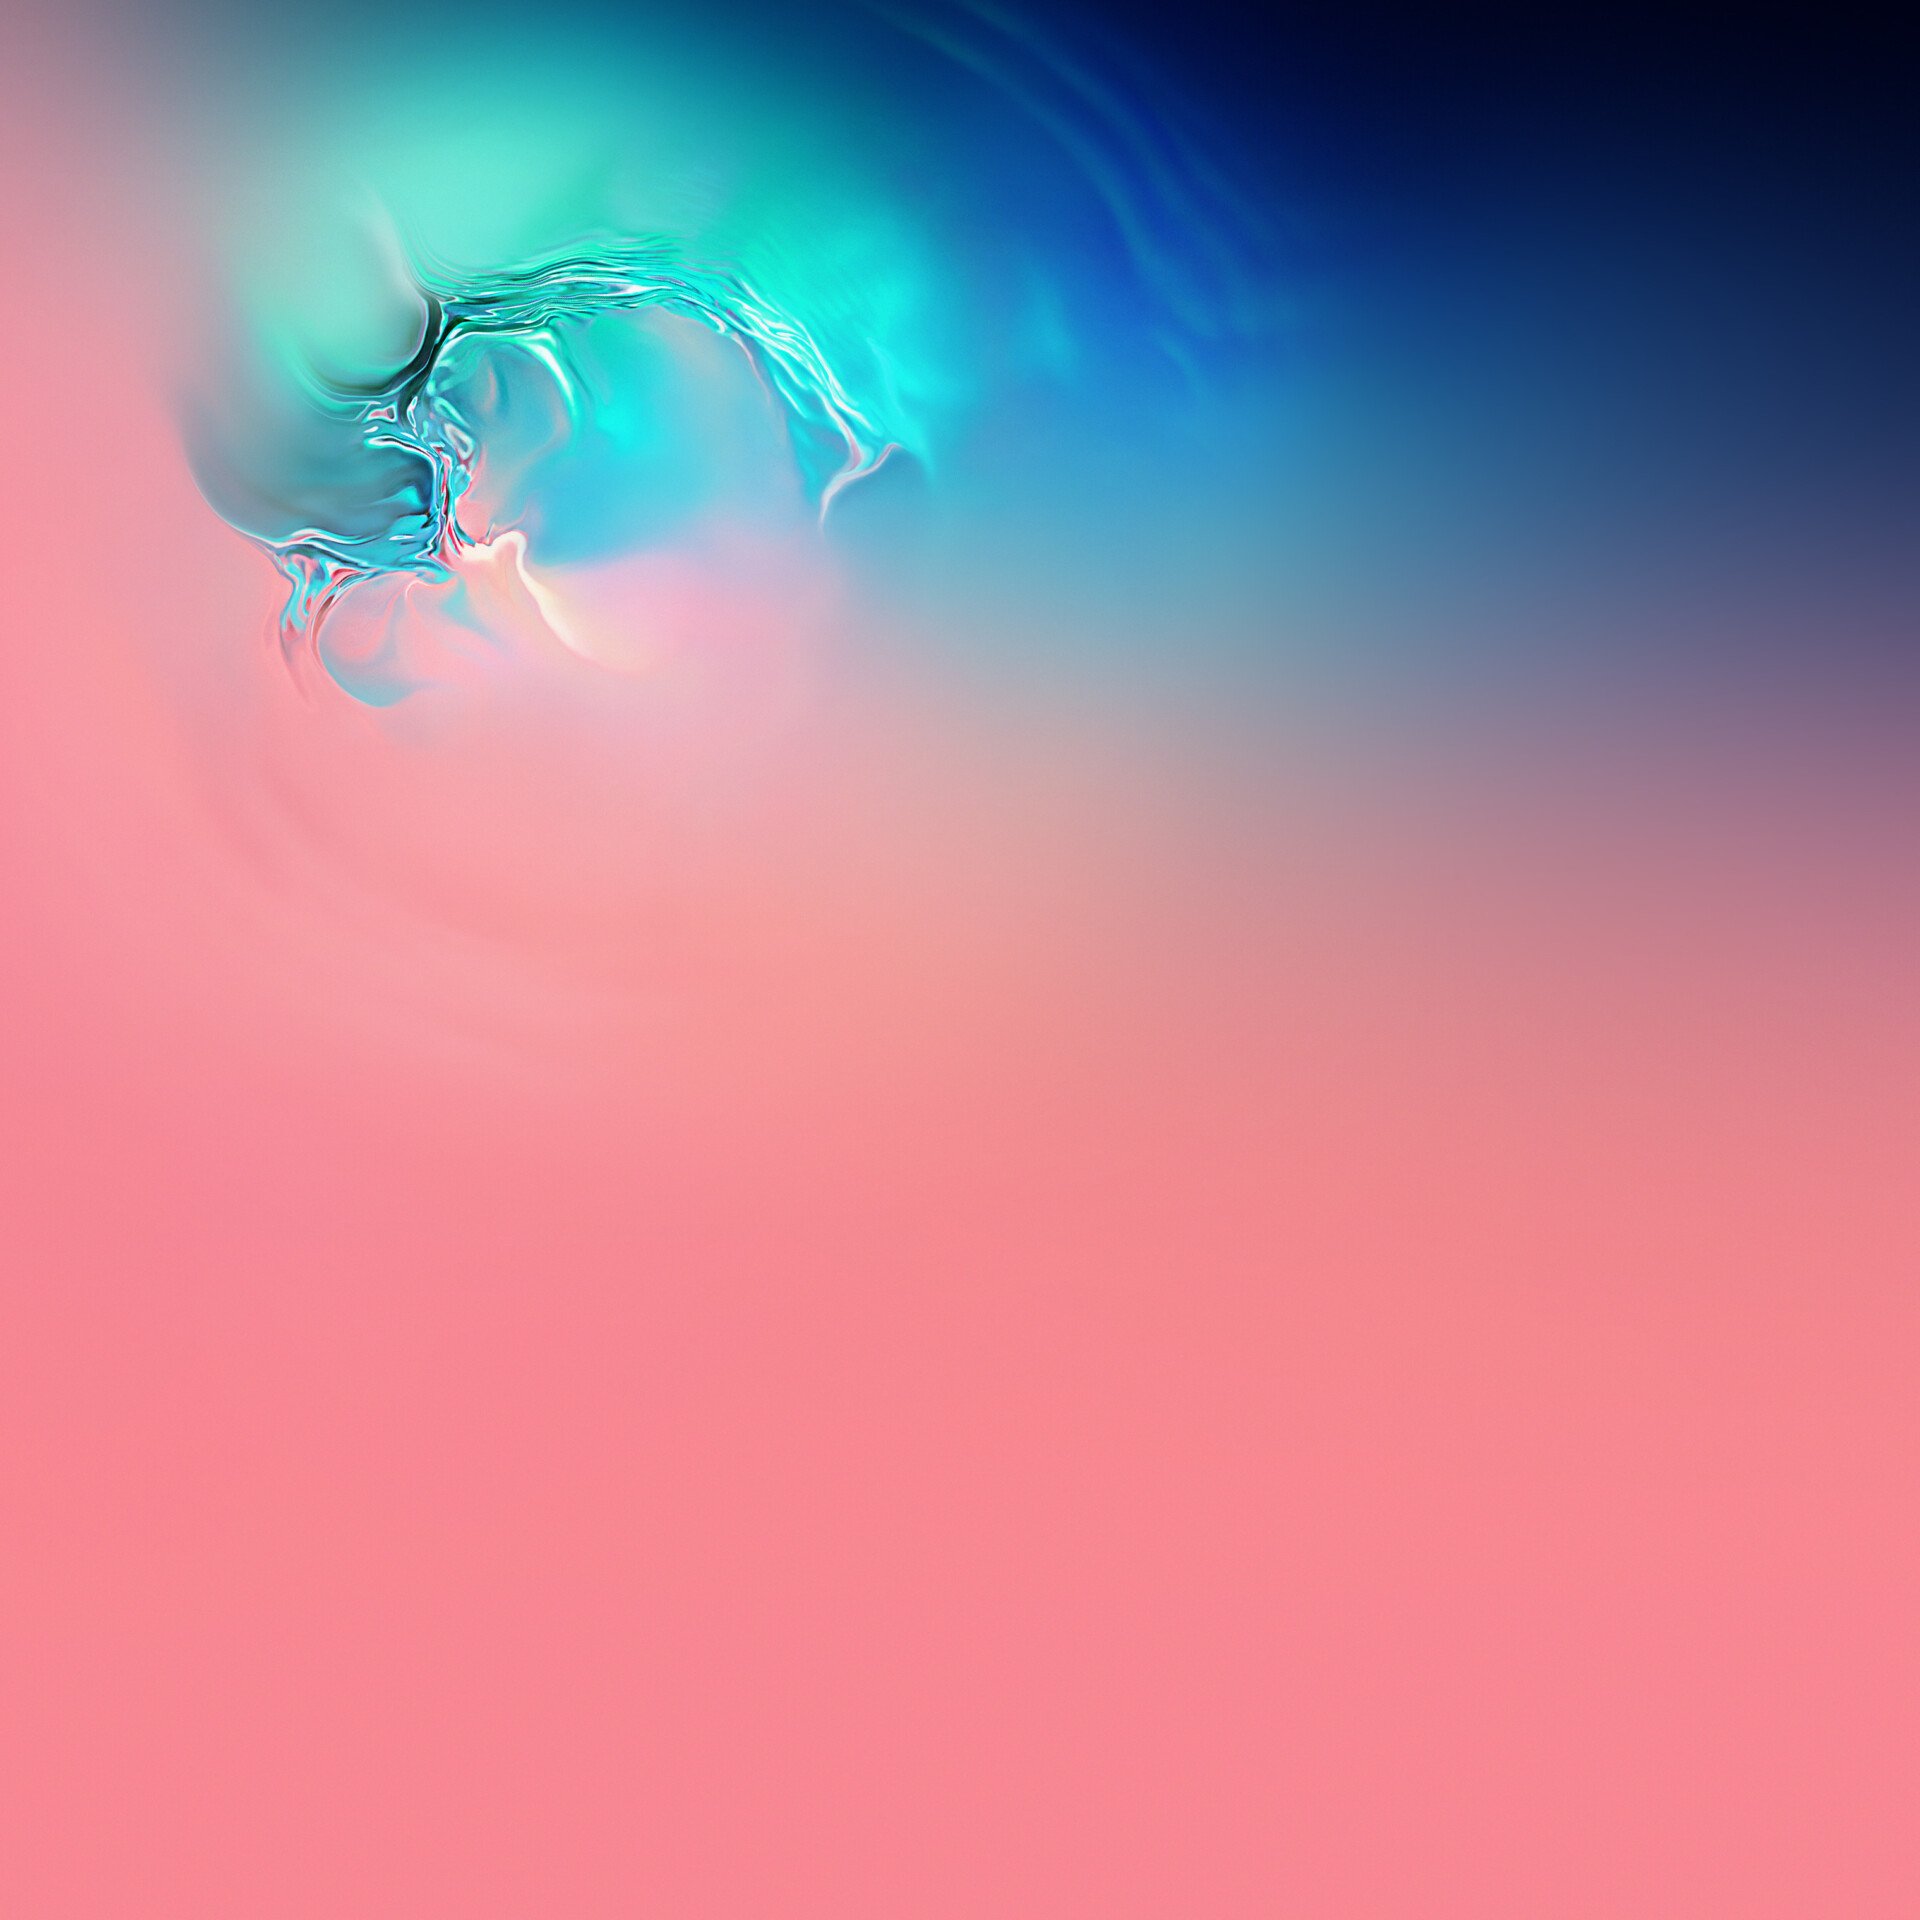 Samsung Galaxy S10 wallpapers are here Grab them at full resolution 1920x1920